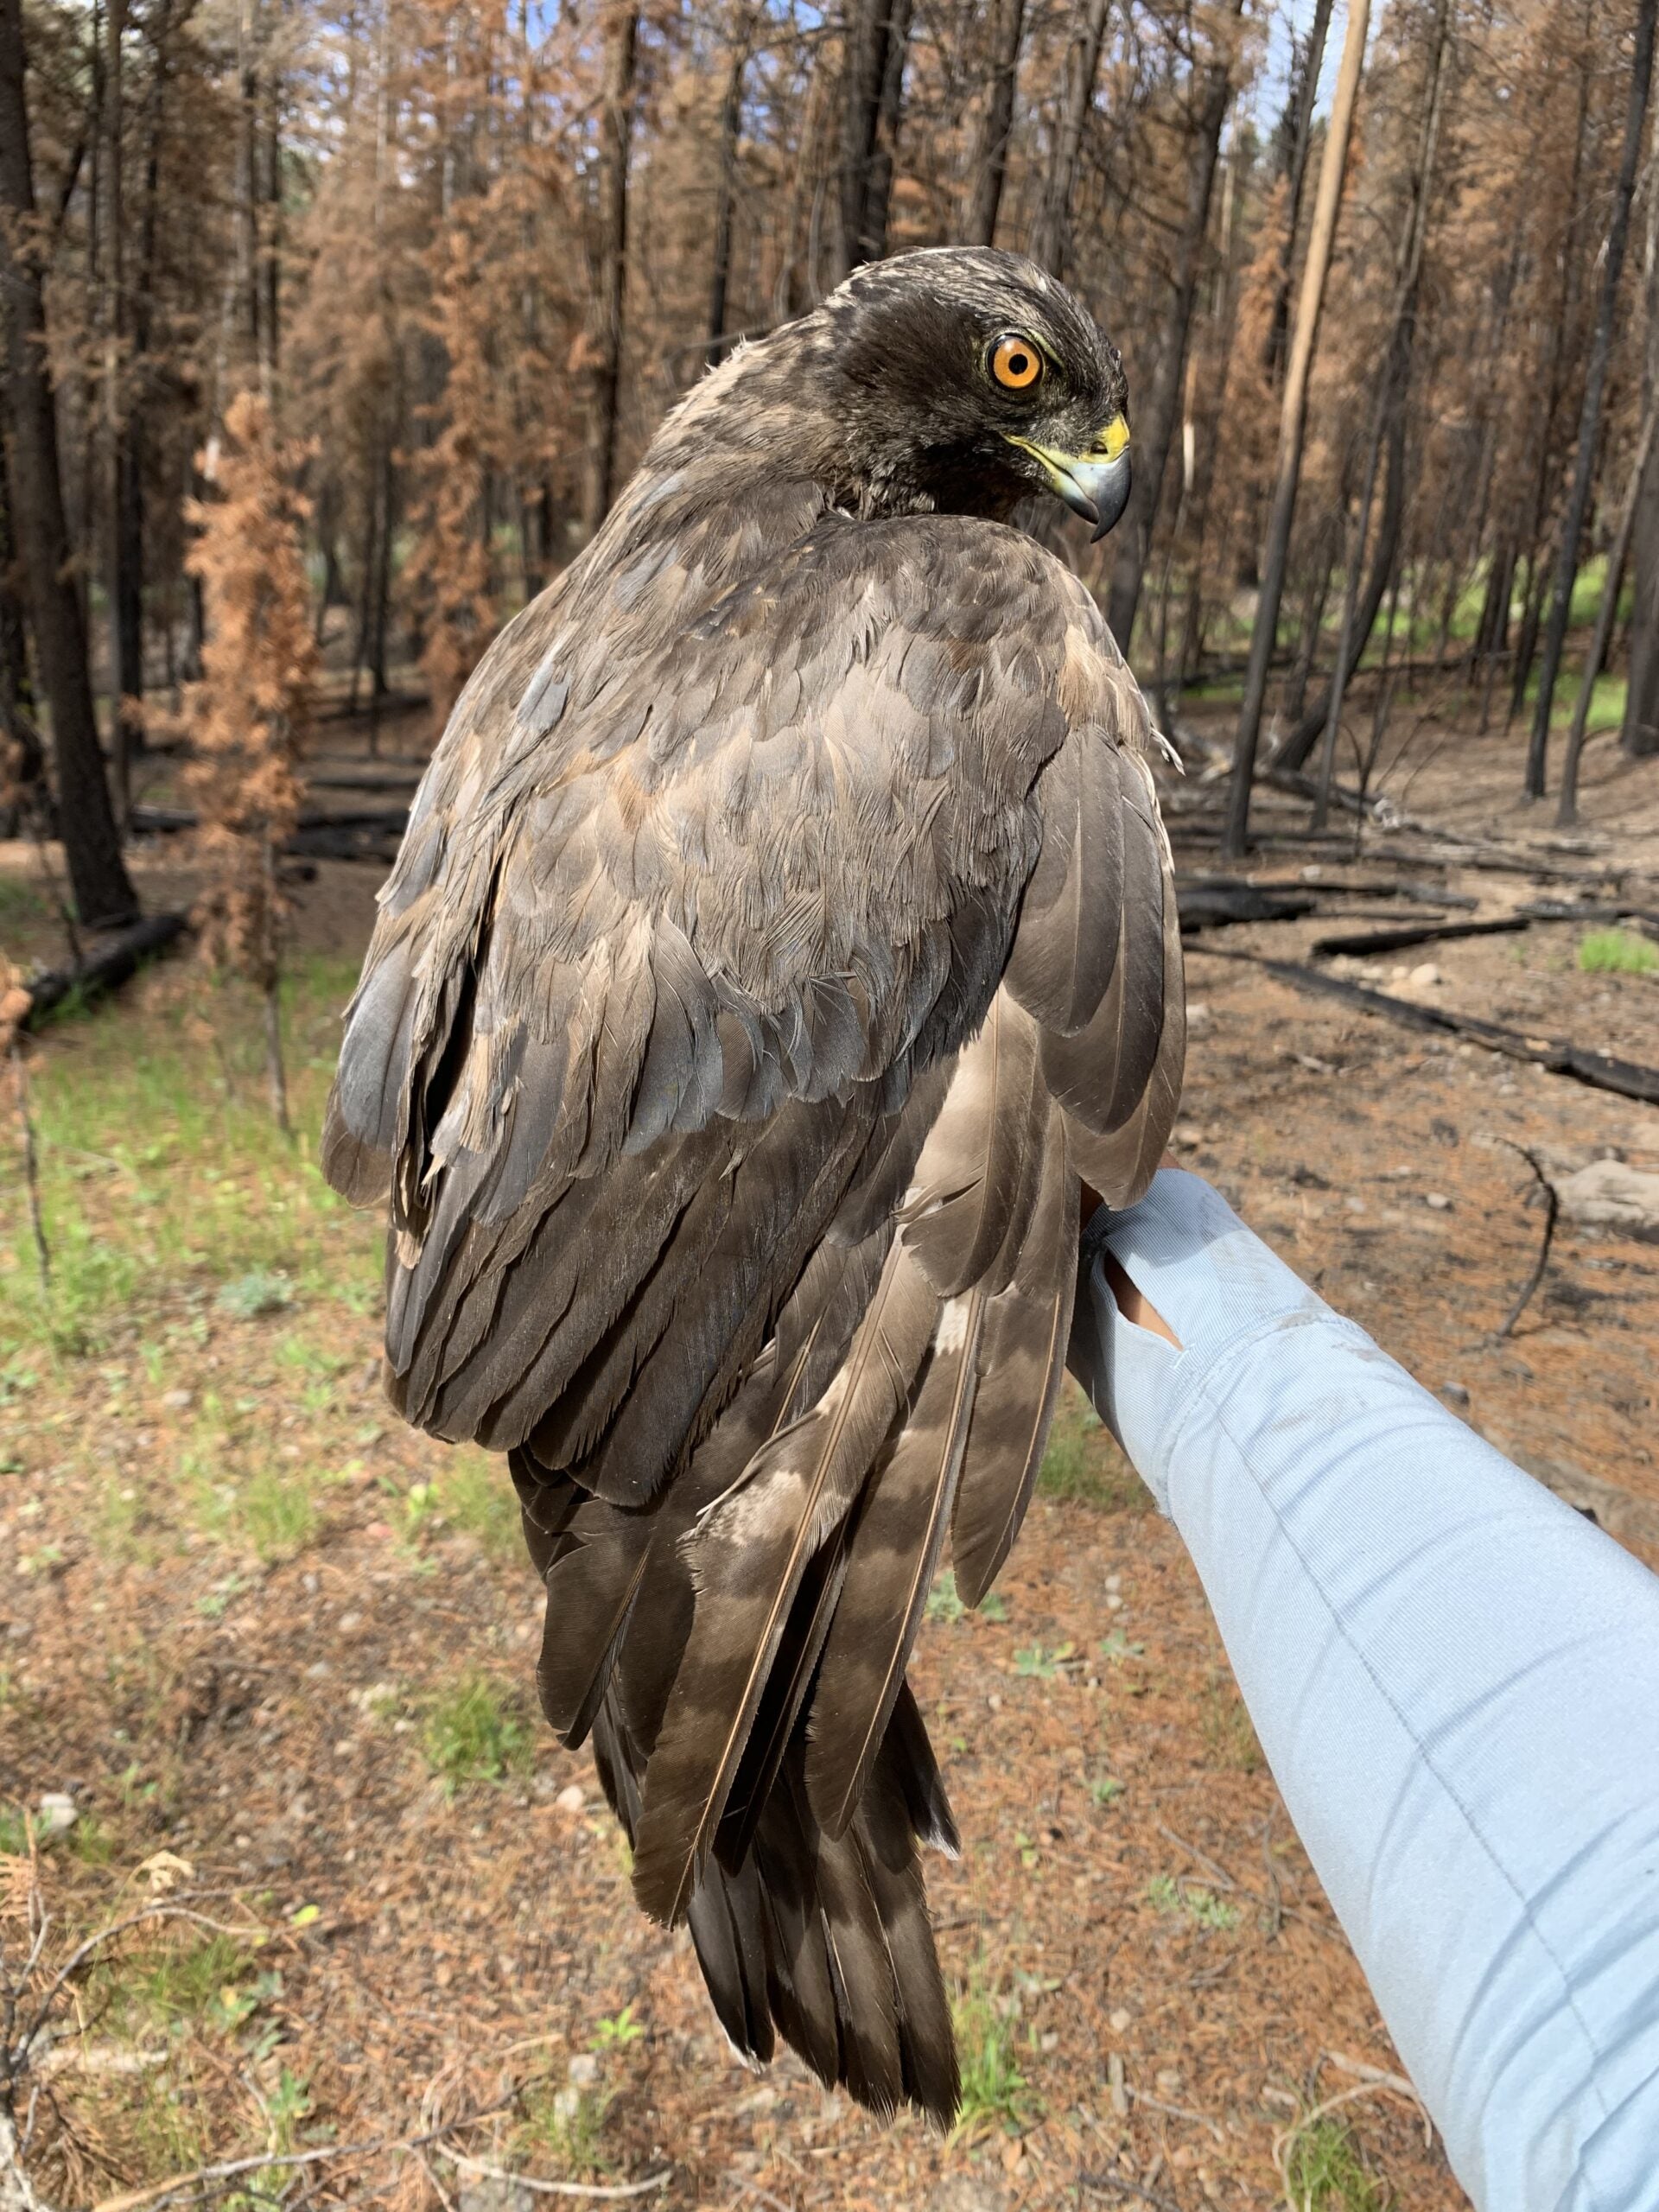 a dark blackish gray goshawk is held in a biologists outstretched hand. The goshawk is looking downward and to the side with intense orange eyes. Behind is a burned forest scene with darkened tree trunks, orange dead conifer needles, and mostly bare understory